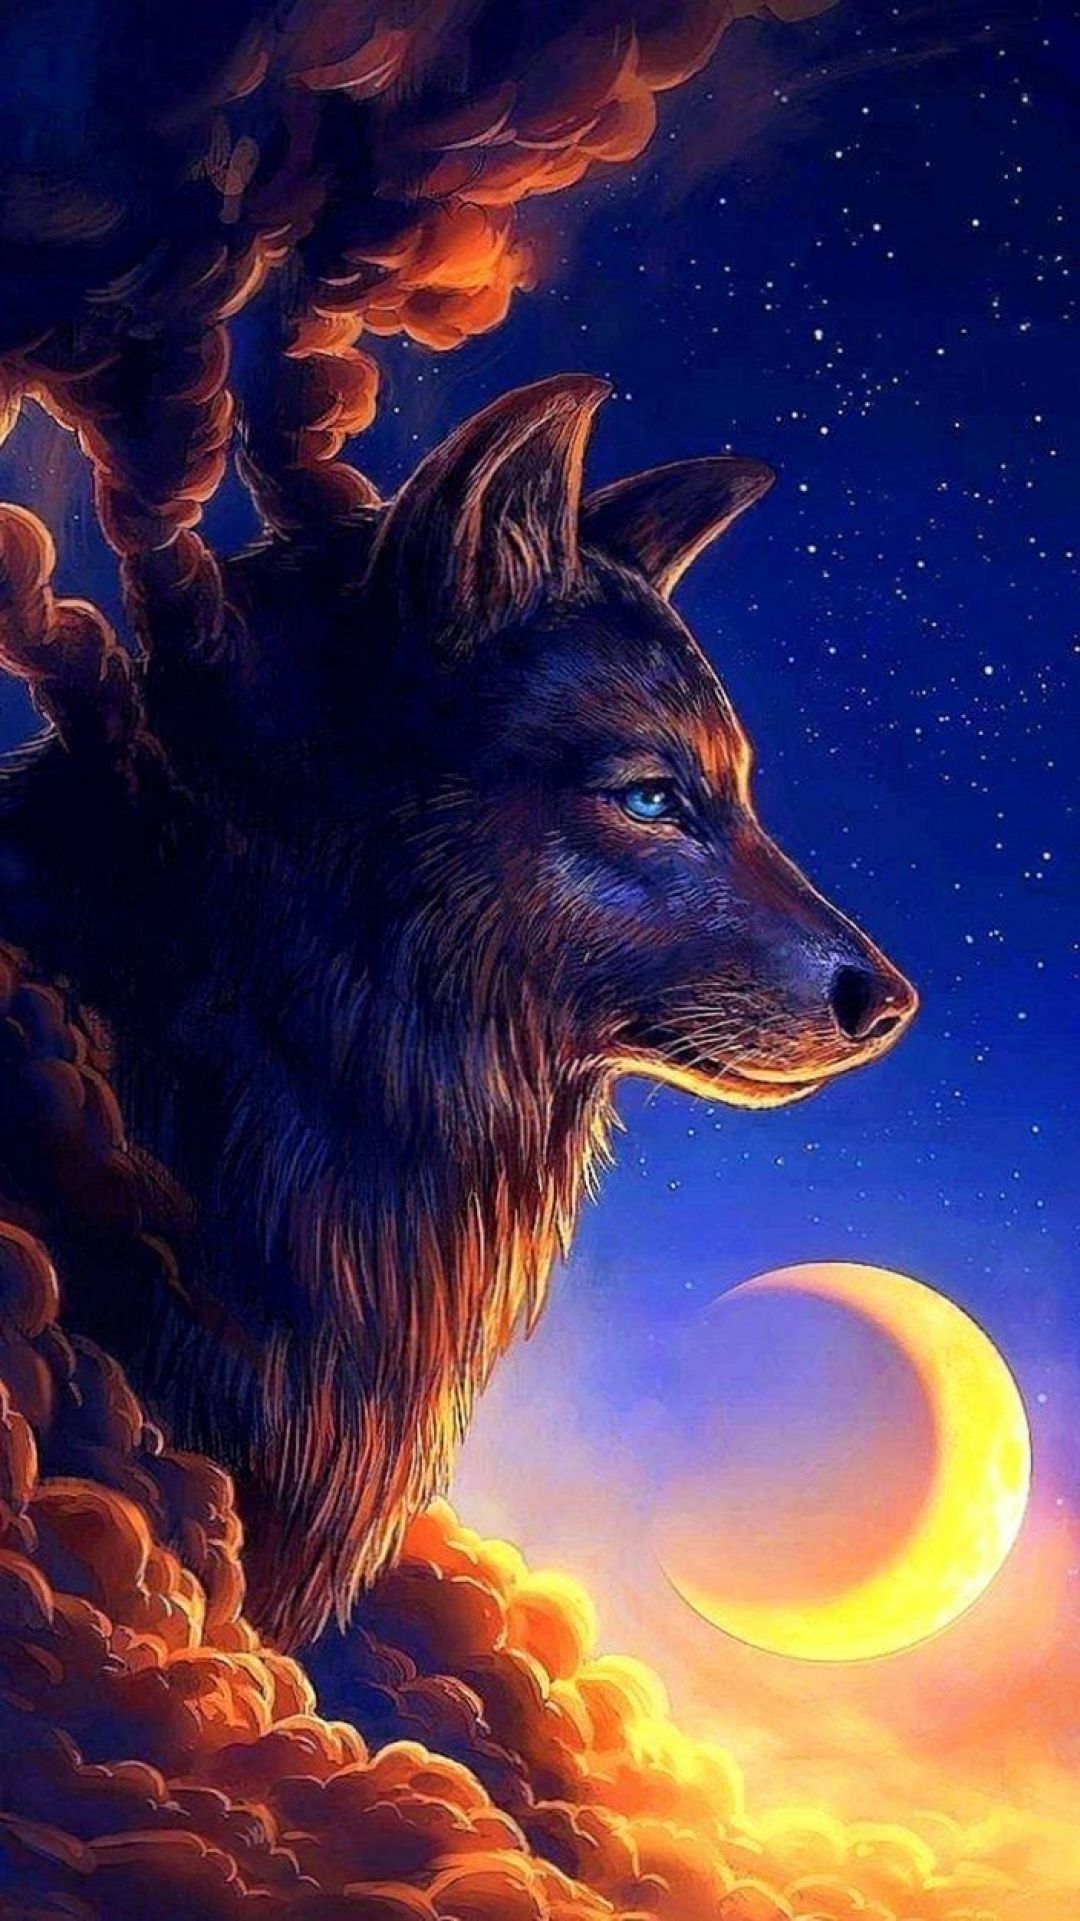 Android, Iphone, Desktop Hd Backgrounds / Wallpapers - Wolf Backgrounds Red - HD Wallpaper 